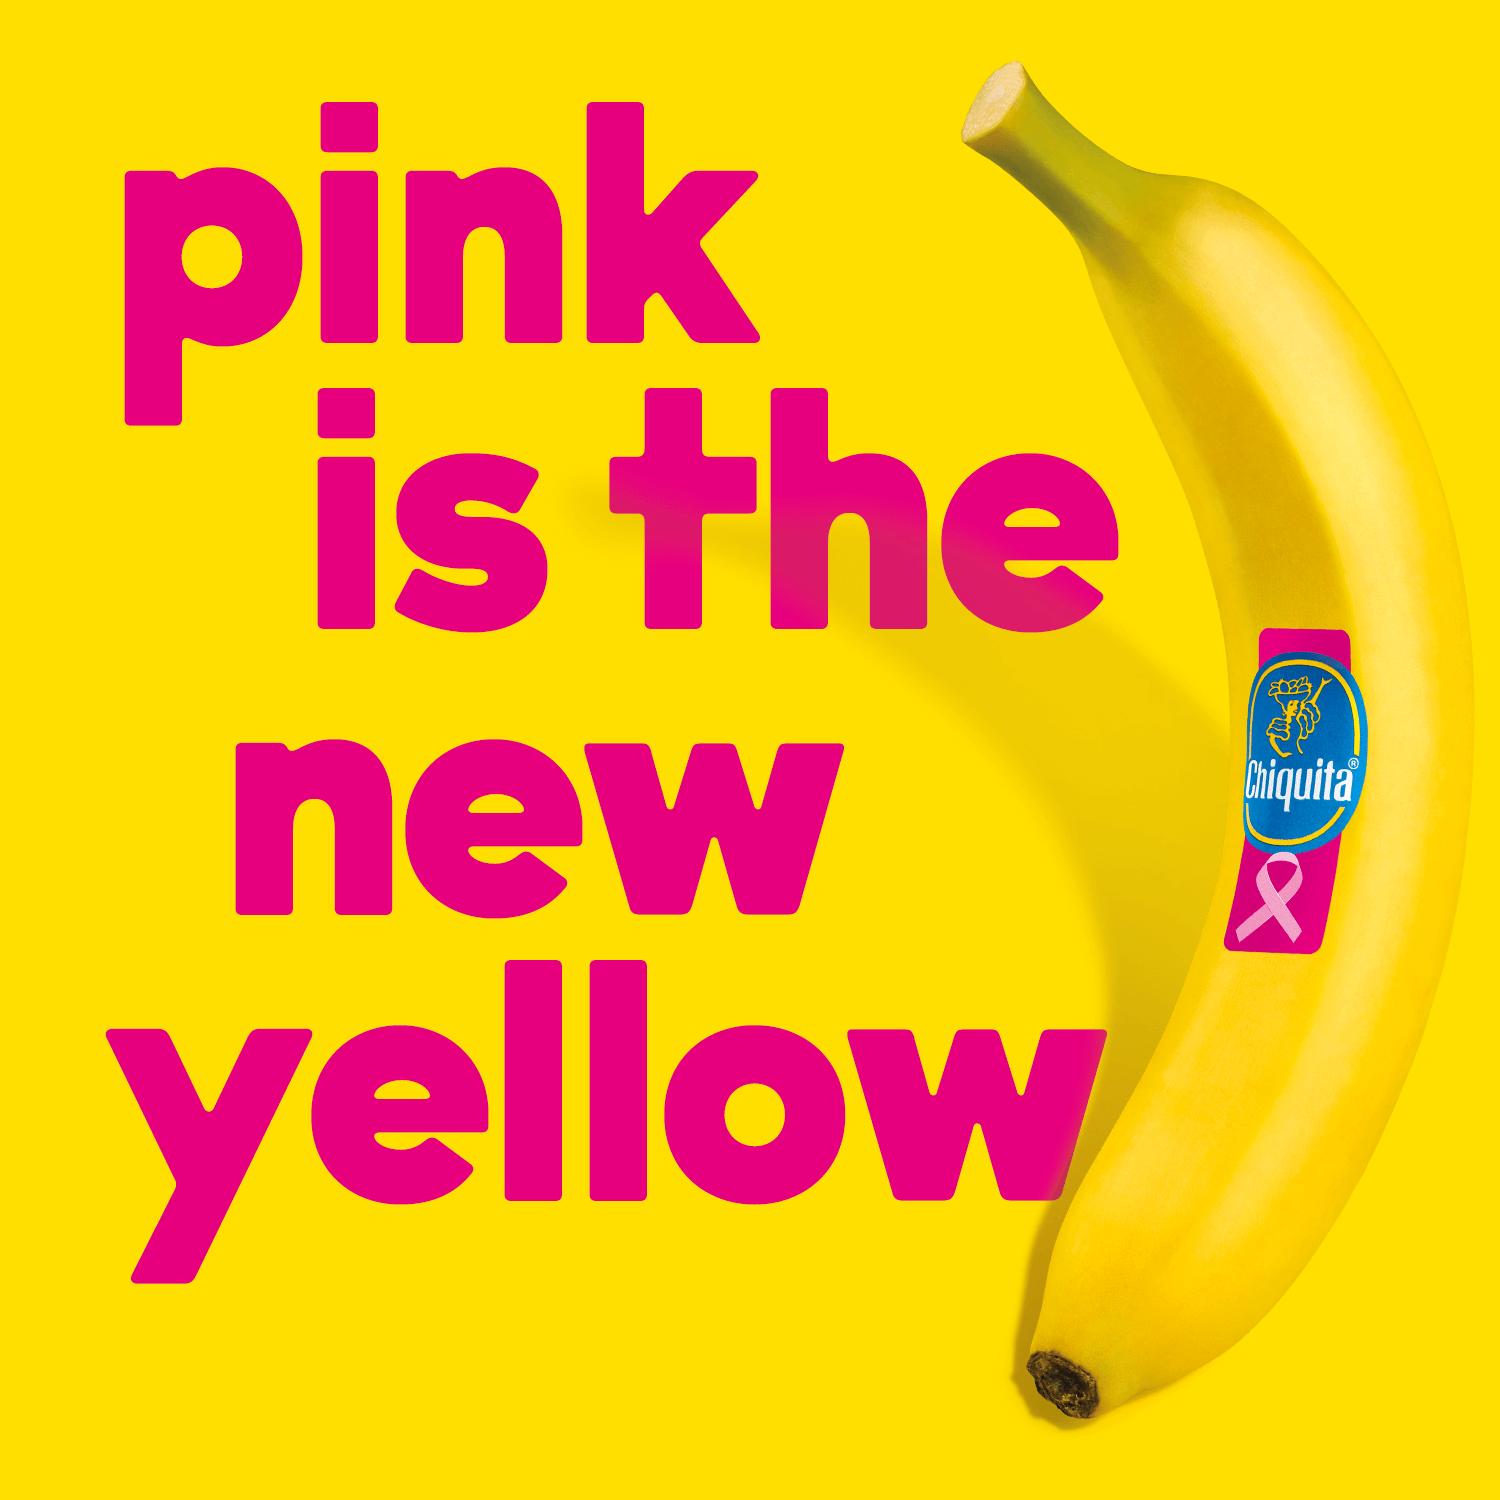 Pink is the new yellow